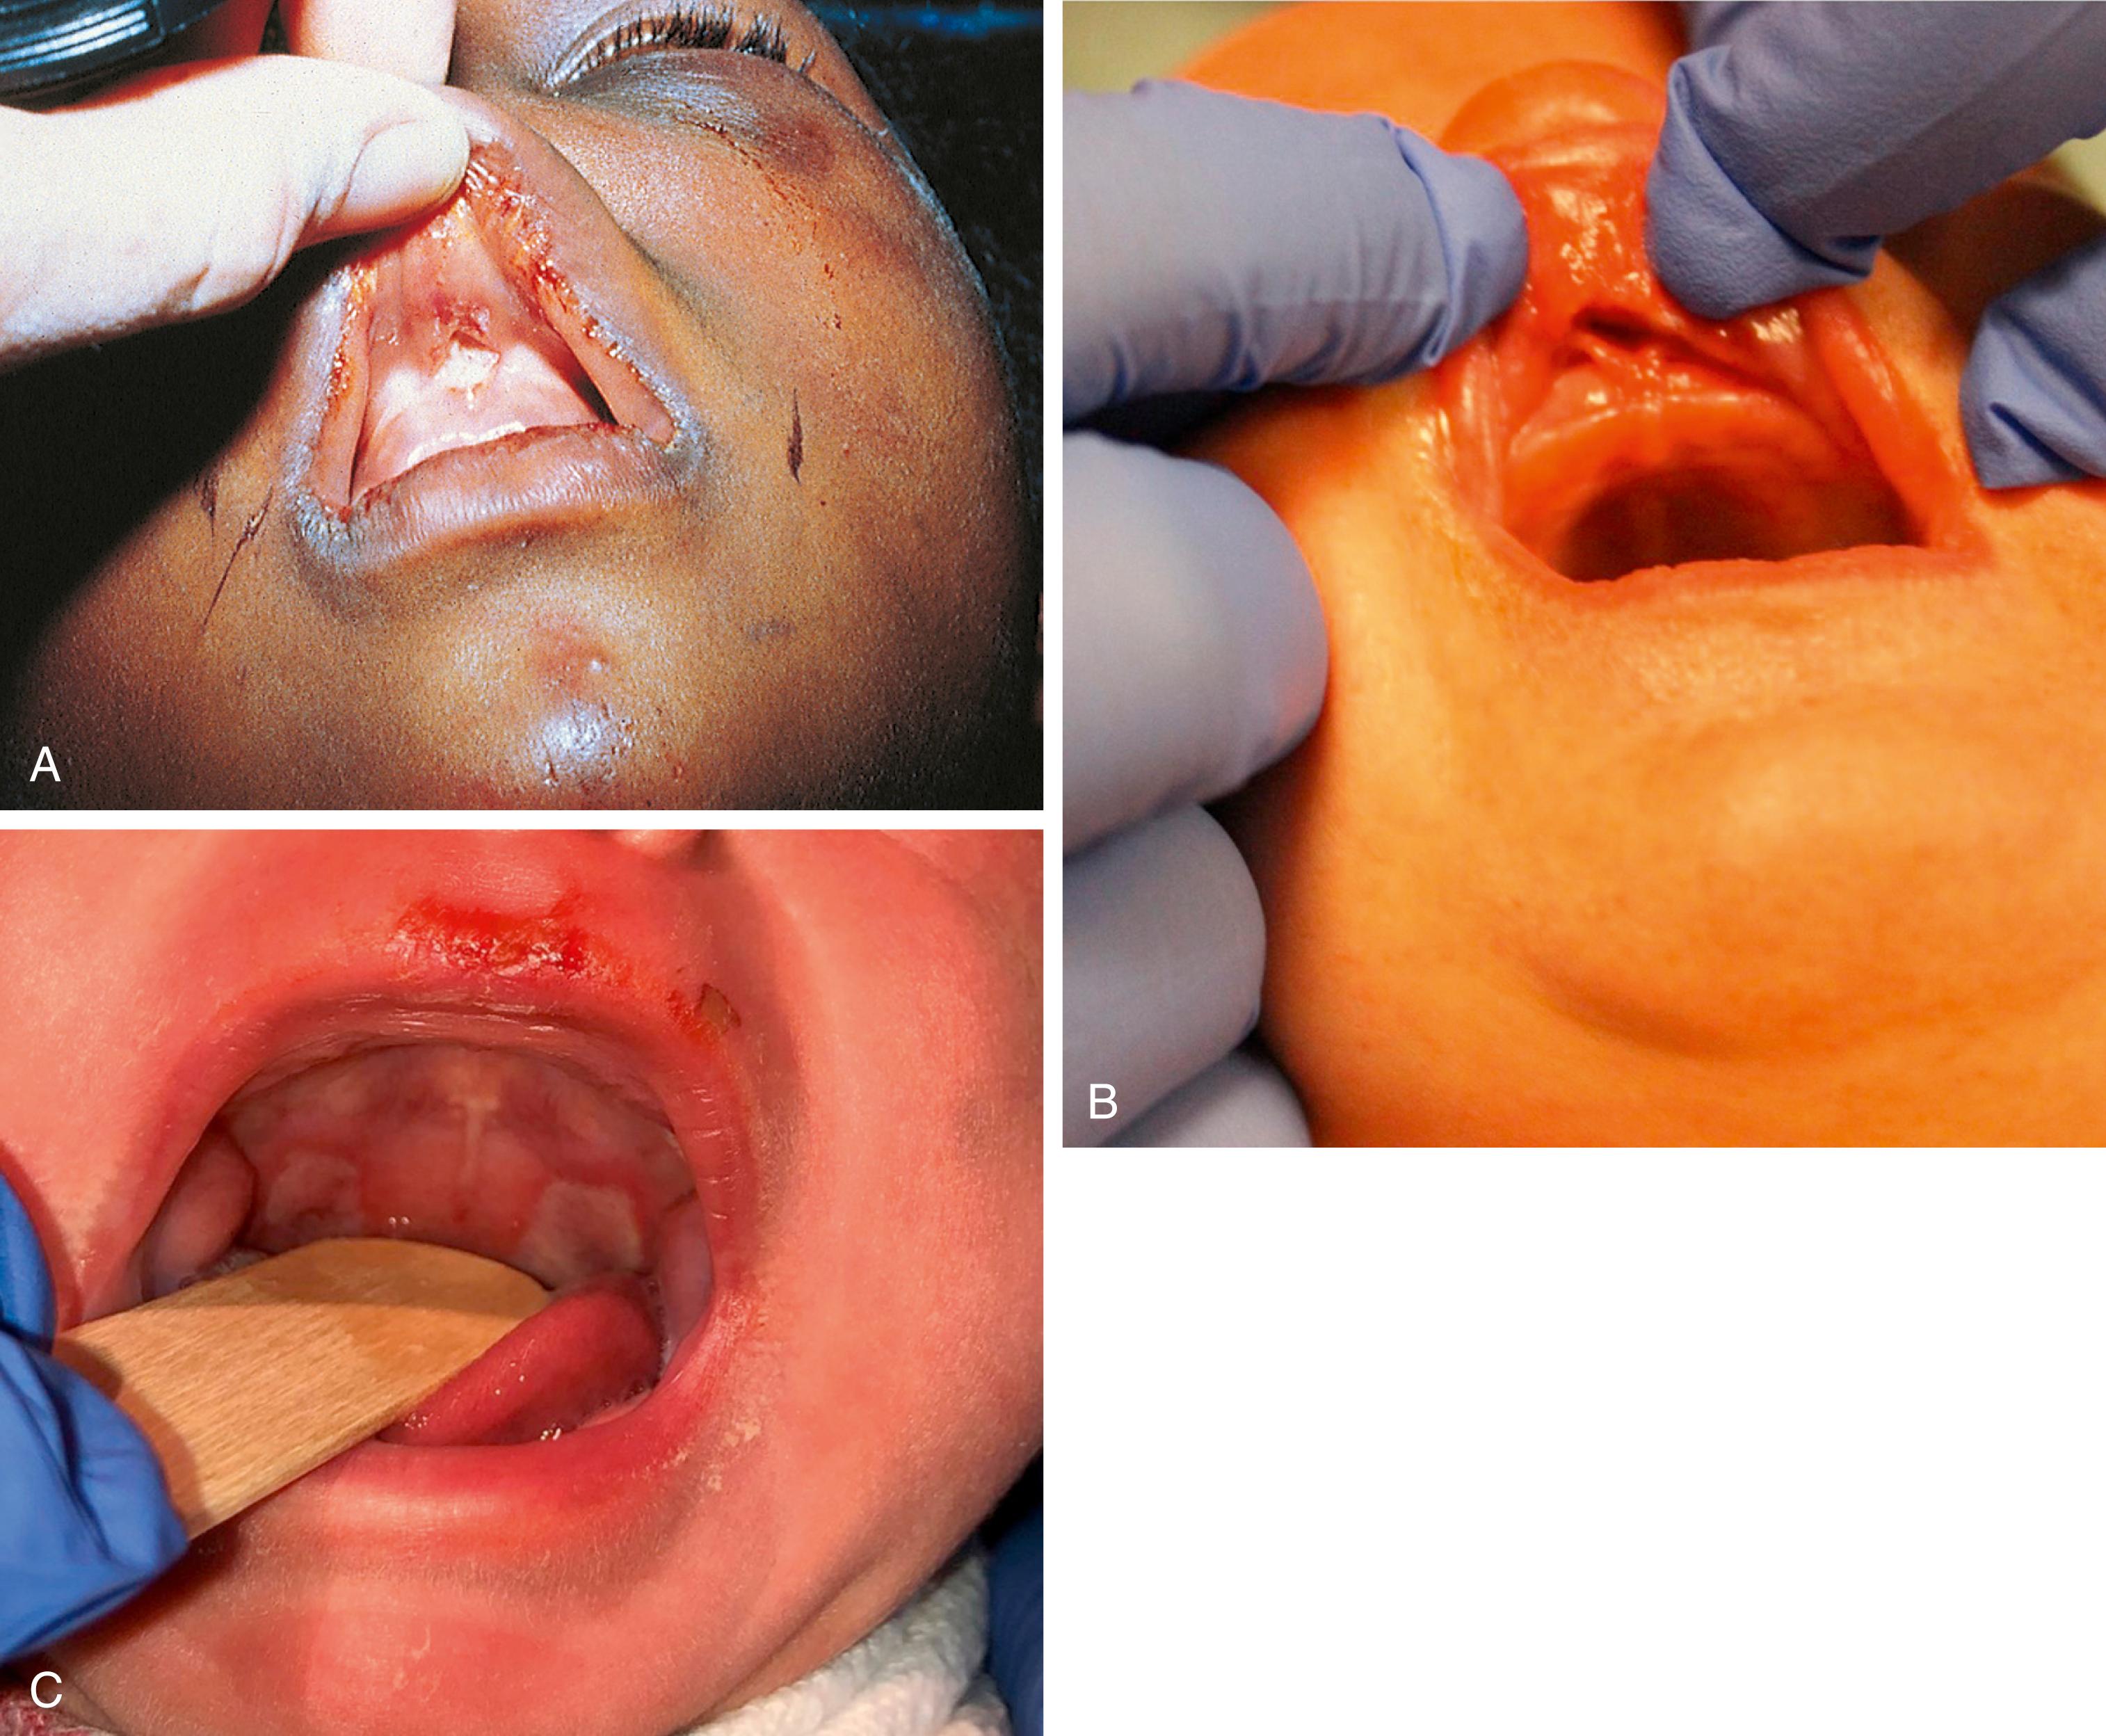 Fig. 6.20, (A) Frenulum tear. This badly beaten boy incurred a torn frenulum when his abuser tried to muffle his cries by forcibly holding his hand over the child’s mouth. Note the facial bruises. (B) Child presented with blood from the mouth without a history of trauma. Found to have an upper frenulum tear, facial bruising, multiple classic metaphyseal lesion (CML) fractures, and healing posterior rib fractures. (C) 6-week-old baby admitted with failure to thrive, found to have an upper frenulum tear, lip abrasions, injuries to his soft palate bilaterally, facial bruising, and his drug screen was positive for cocaine. On follow up x-rays, child found to have four healing posterior rib fractures. Additionally, child had gained weight well in a safe environment.